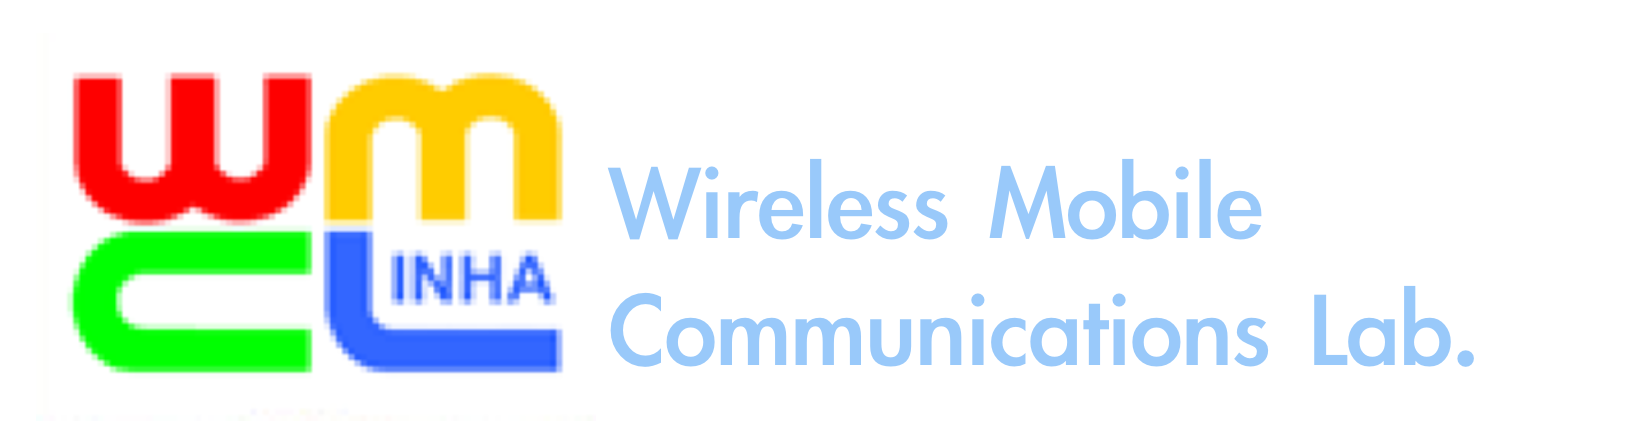 Wireless Mobile Communications Lab